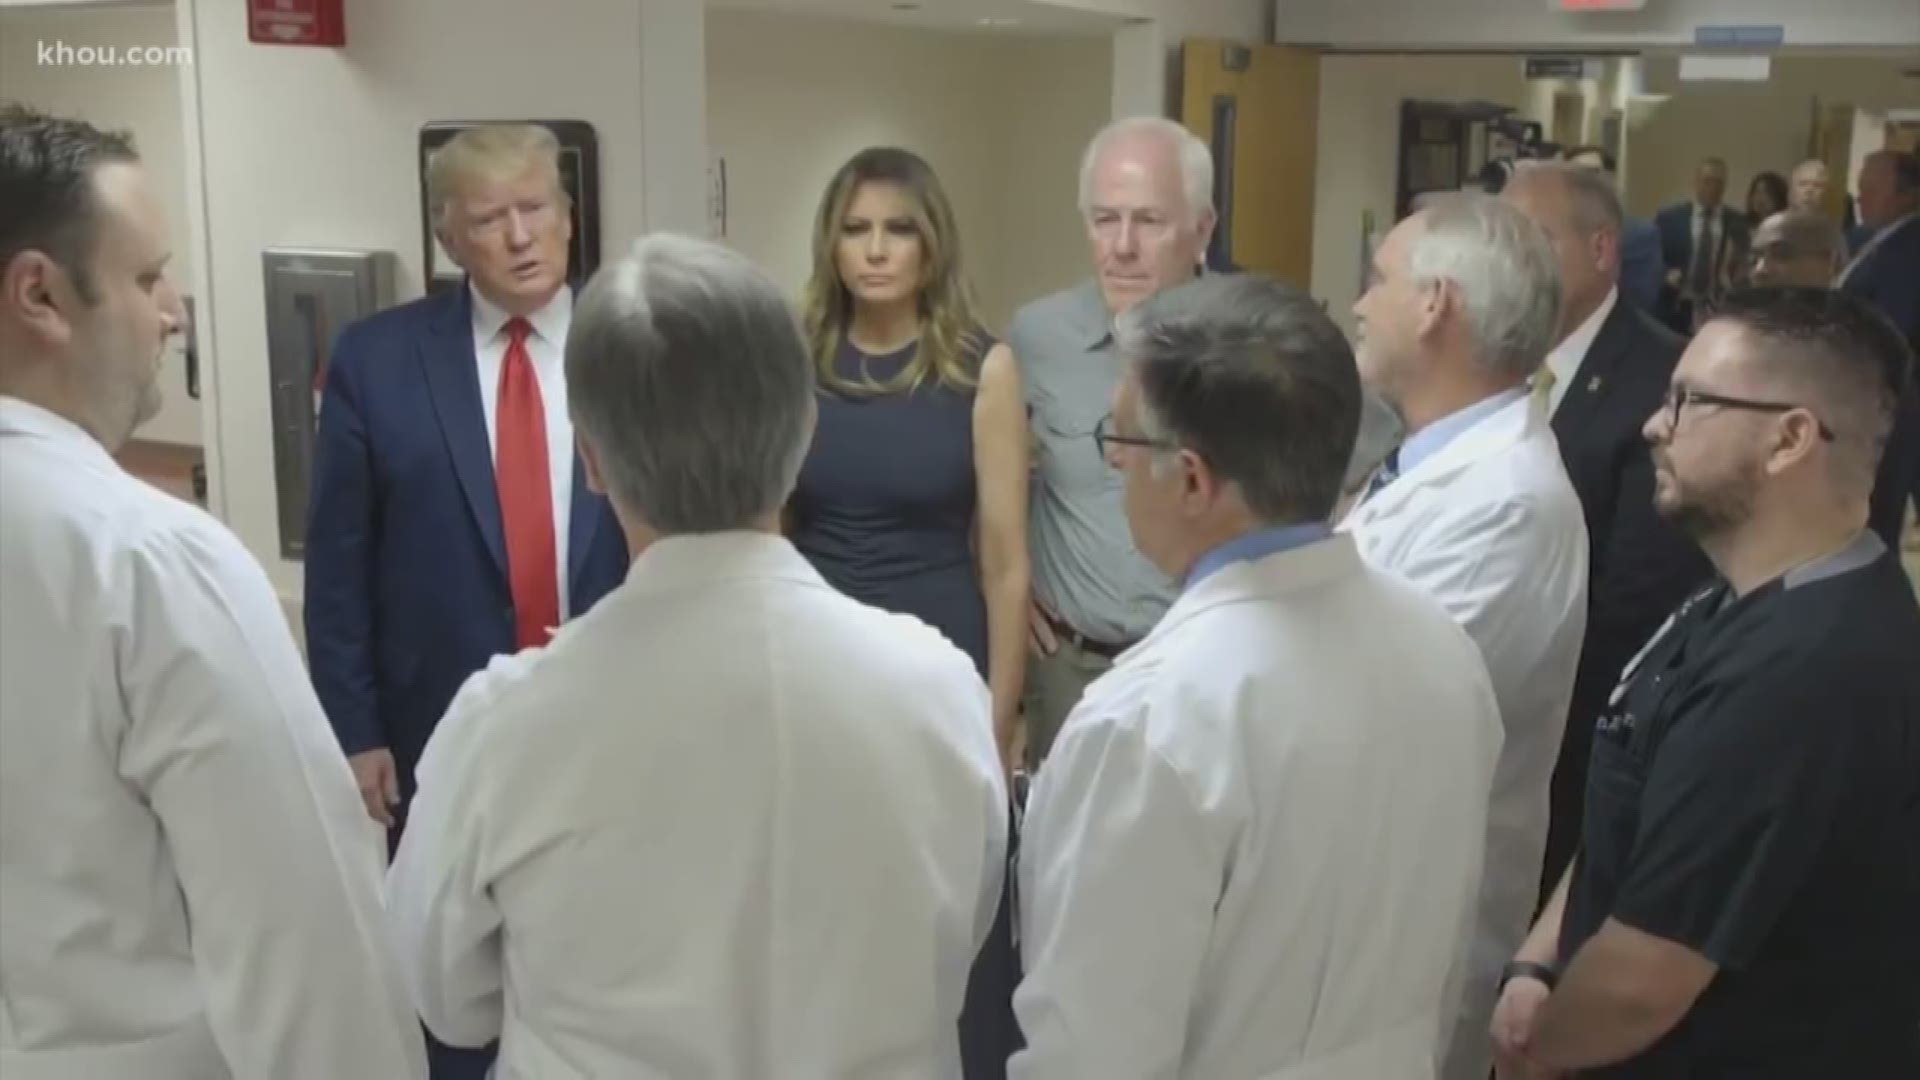 President Trump and First Lady Melania visited a hospital in El Paso where victims of the recent deadly Walmart shooting are recovering.